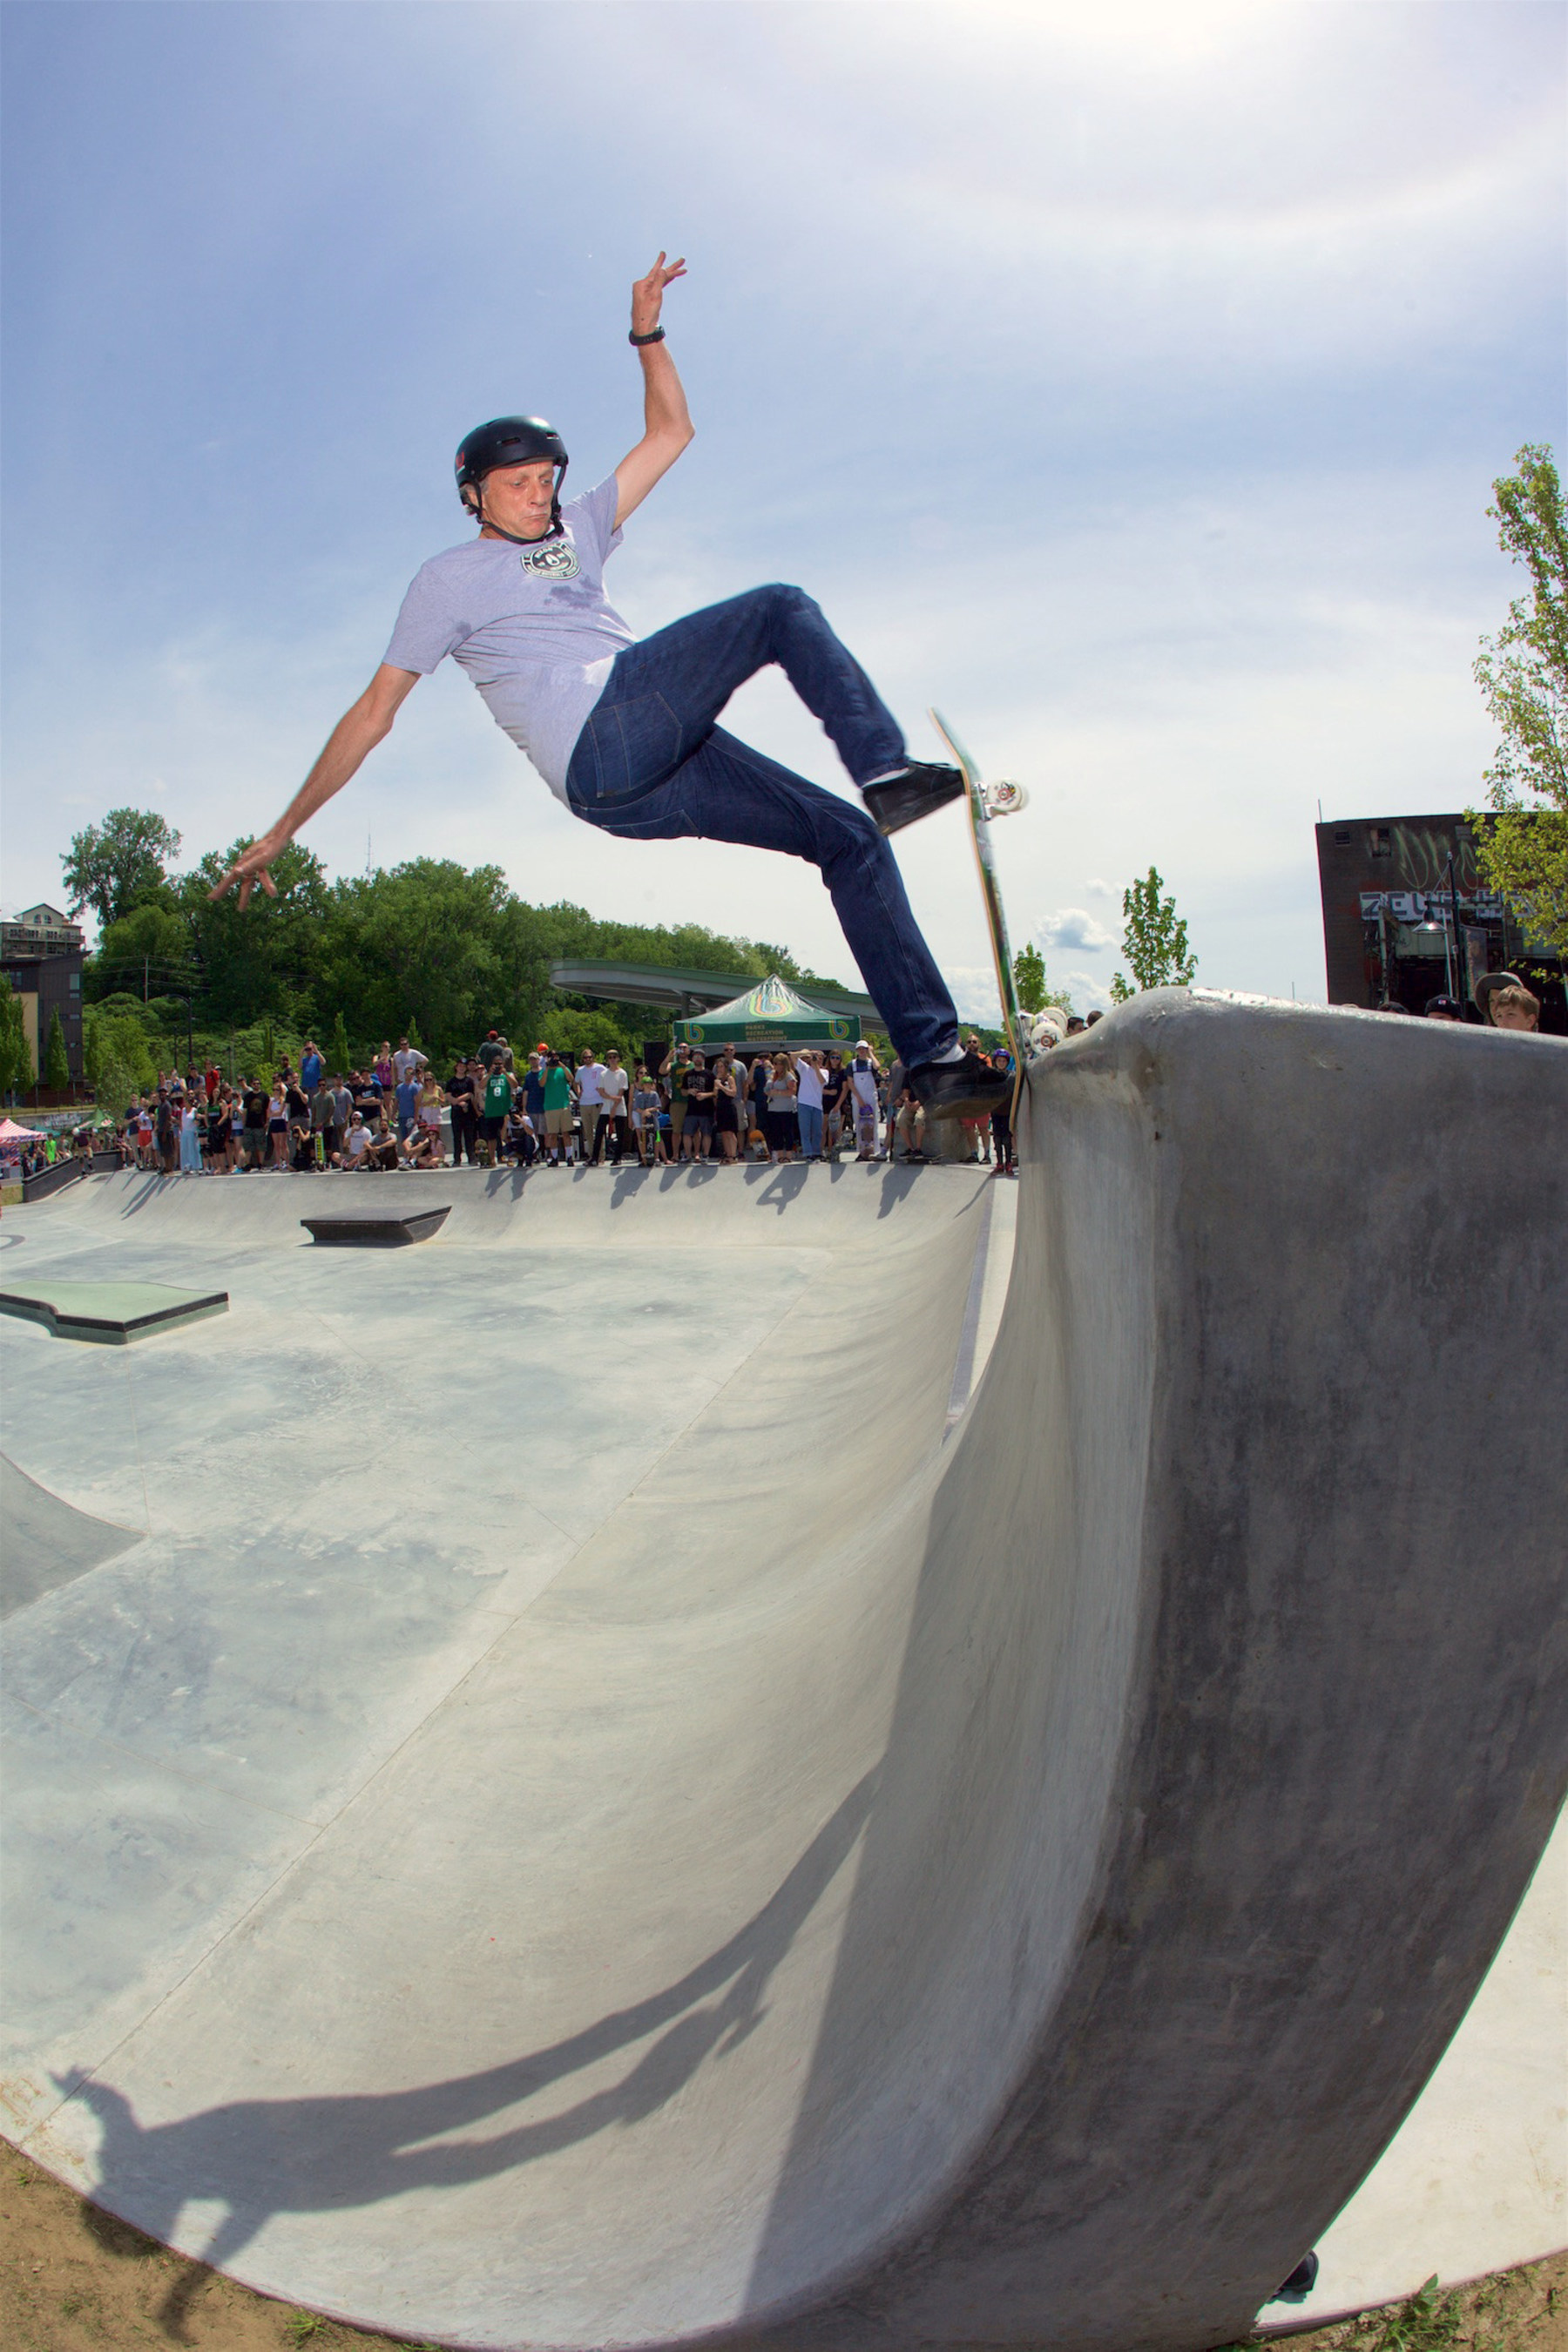 Tony Hawk joined the session at the A-Dog Skatepark in Burlington, Vermont on June 4. The project received a grant from the Tony Hawk Foundation in 2010. Photo: Jody Morris